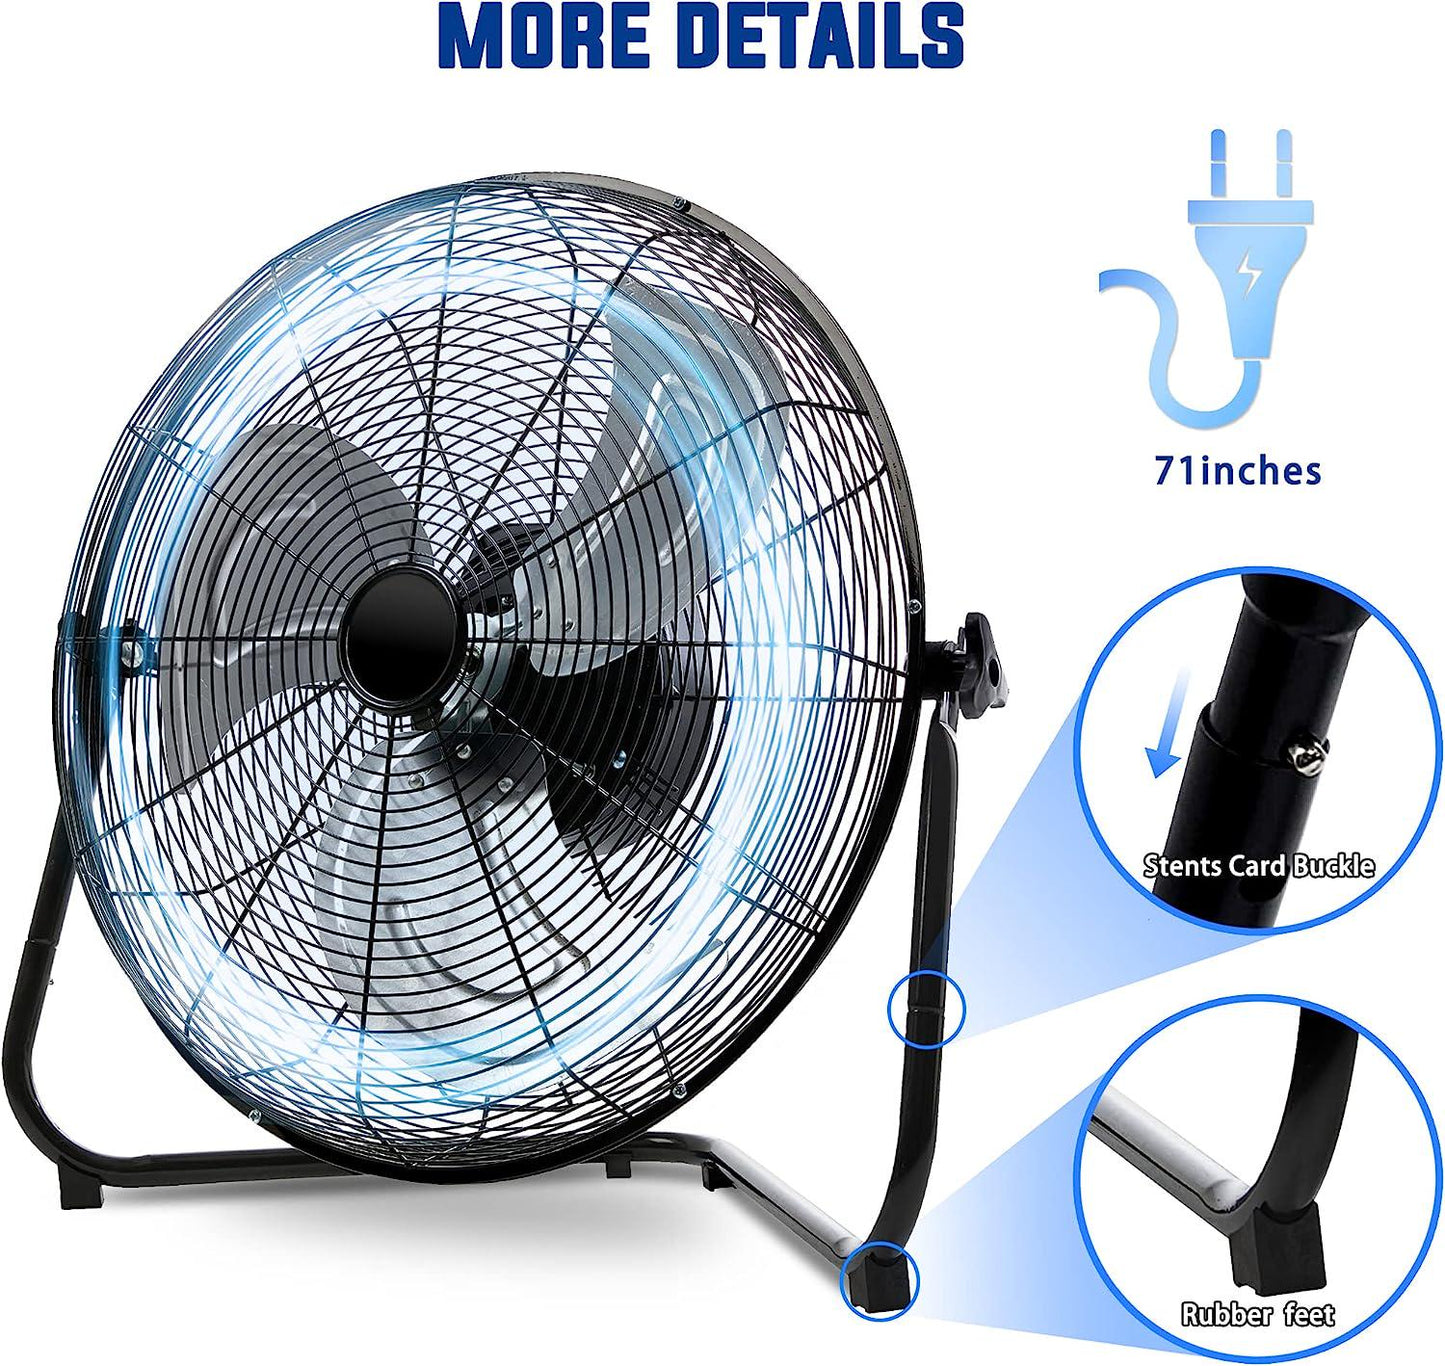 FLAME 6000 CFM Floor Fan High Velocity,20 Inch 3-Speed Heavy Duty Metal Fan with Wall-Mounting System,360° Adjustable Tilting